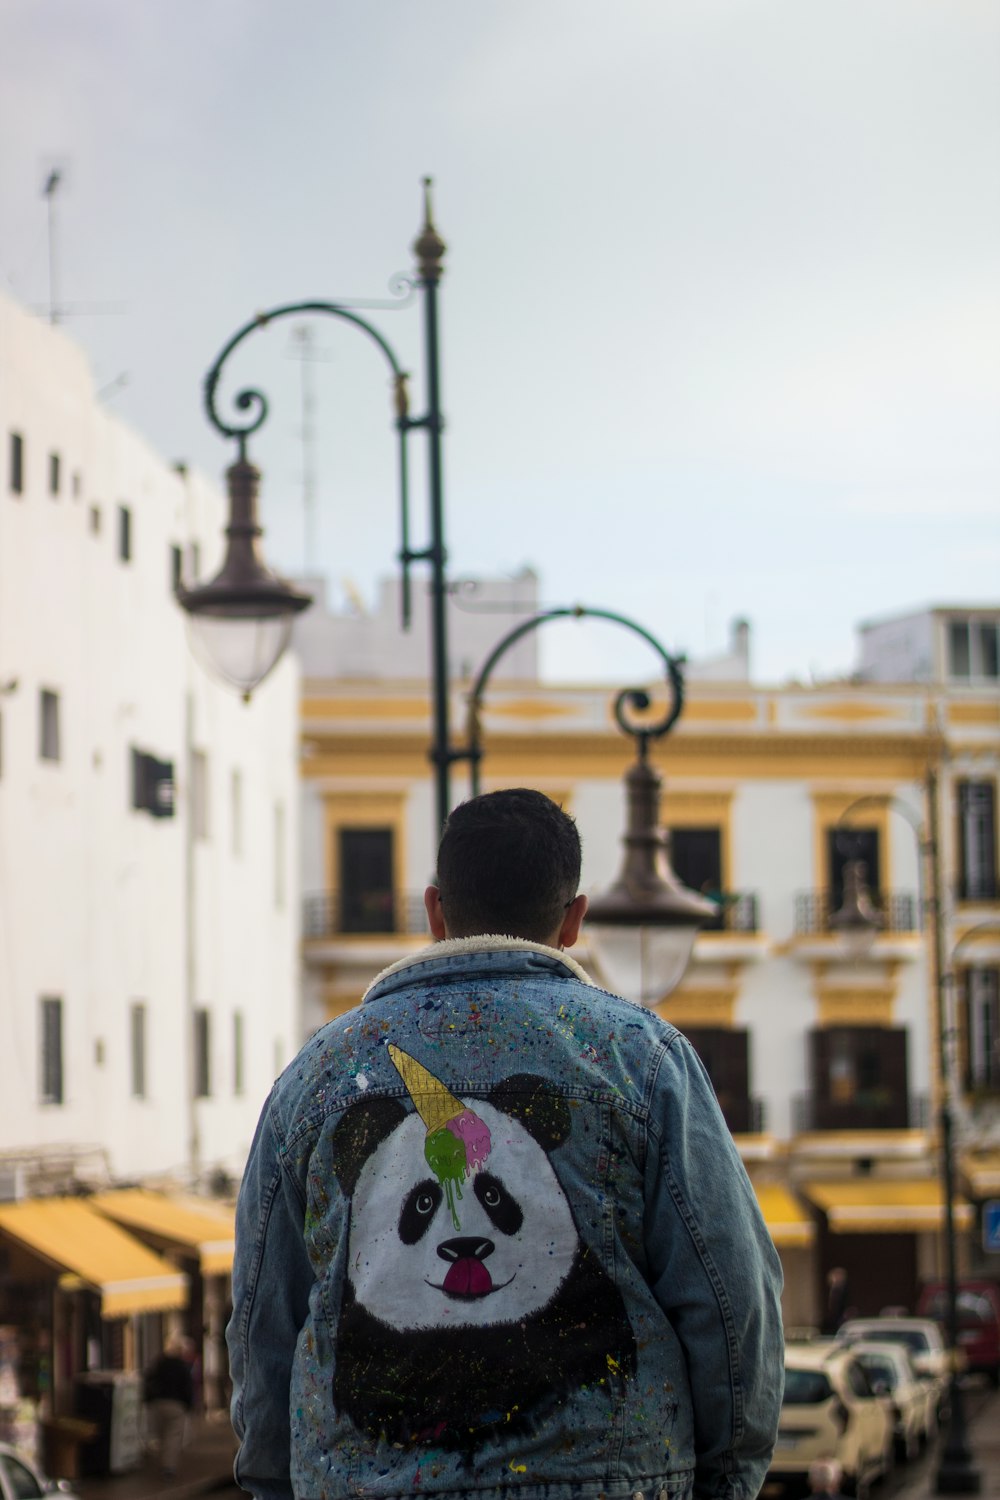 a man wearing a jacket with a panda face painted on it